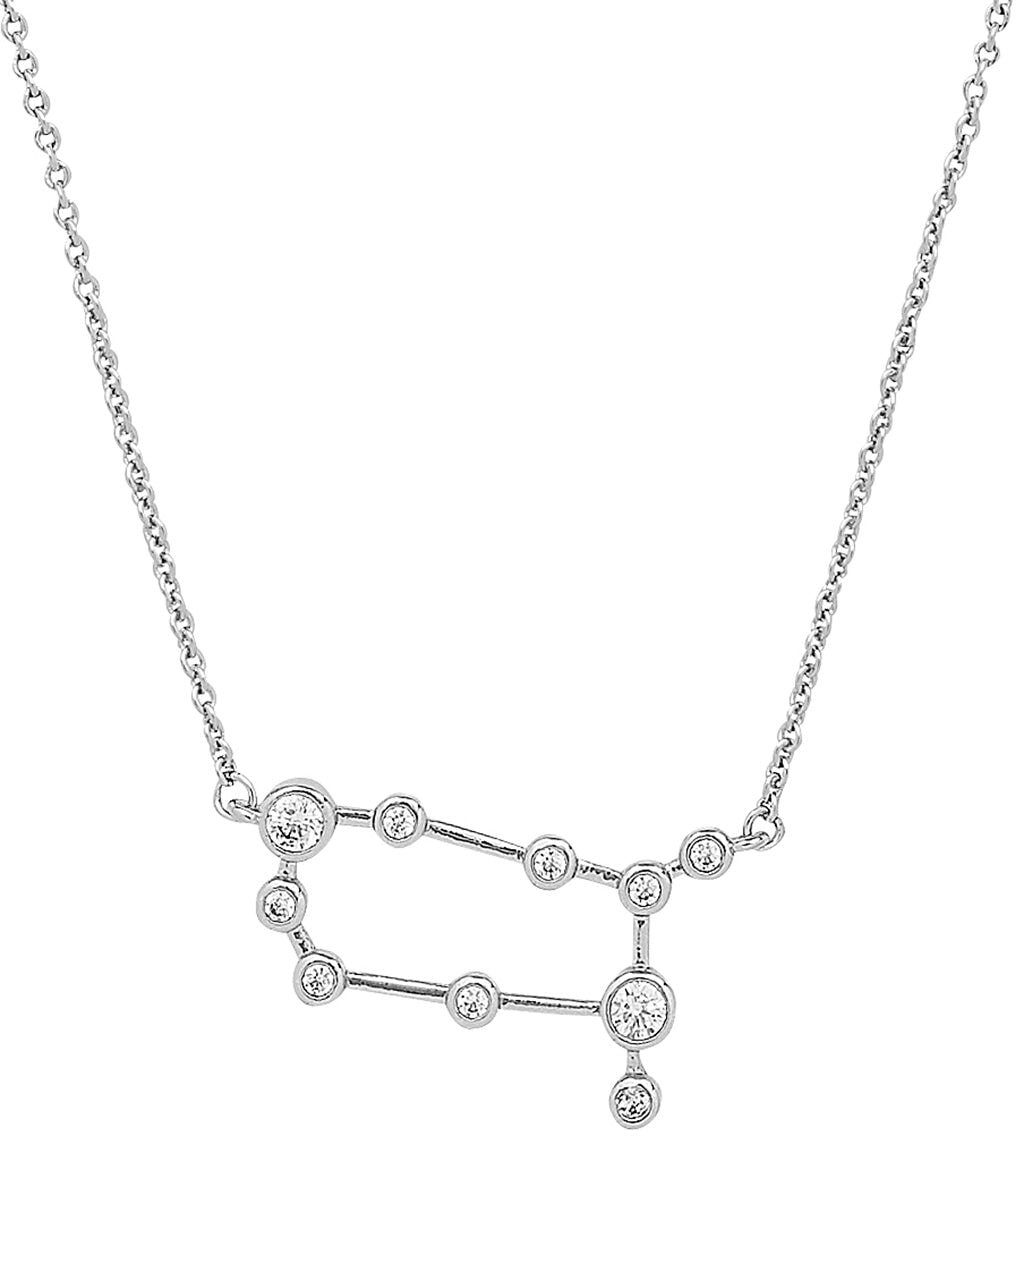 'When Stars Align' Constellation Necklace Necklace Sterling Forever Silver Gemini (May 21 - Jun 20) 